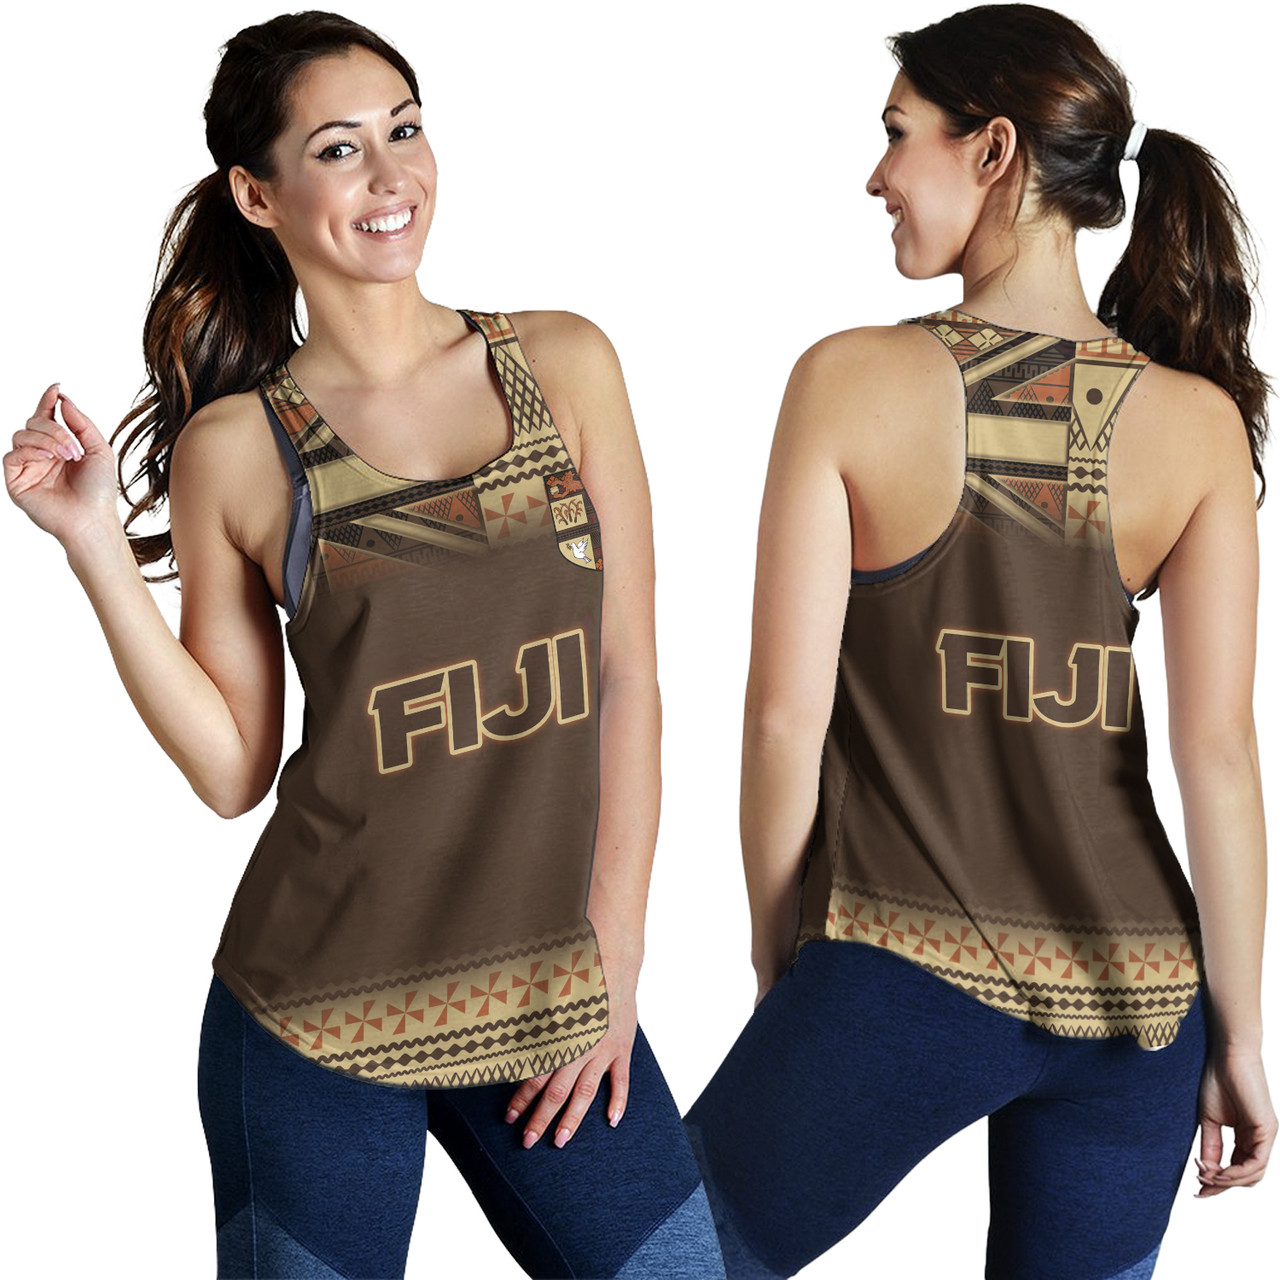 Fiji Women Tank Flag Color With Traditional Patterns Ver 2